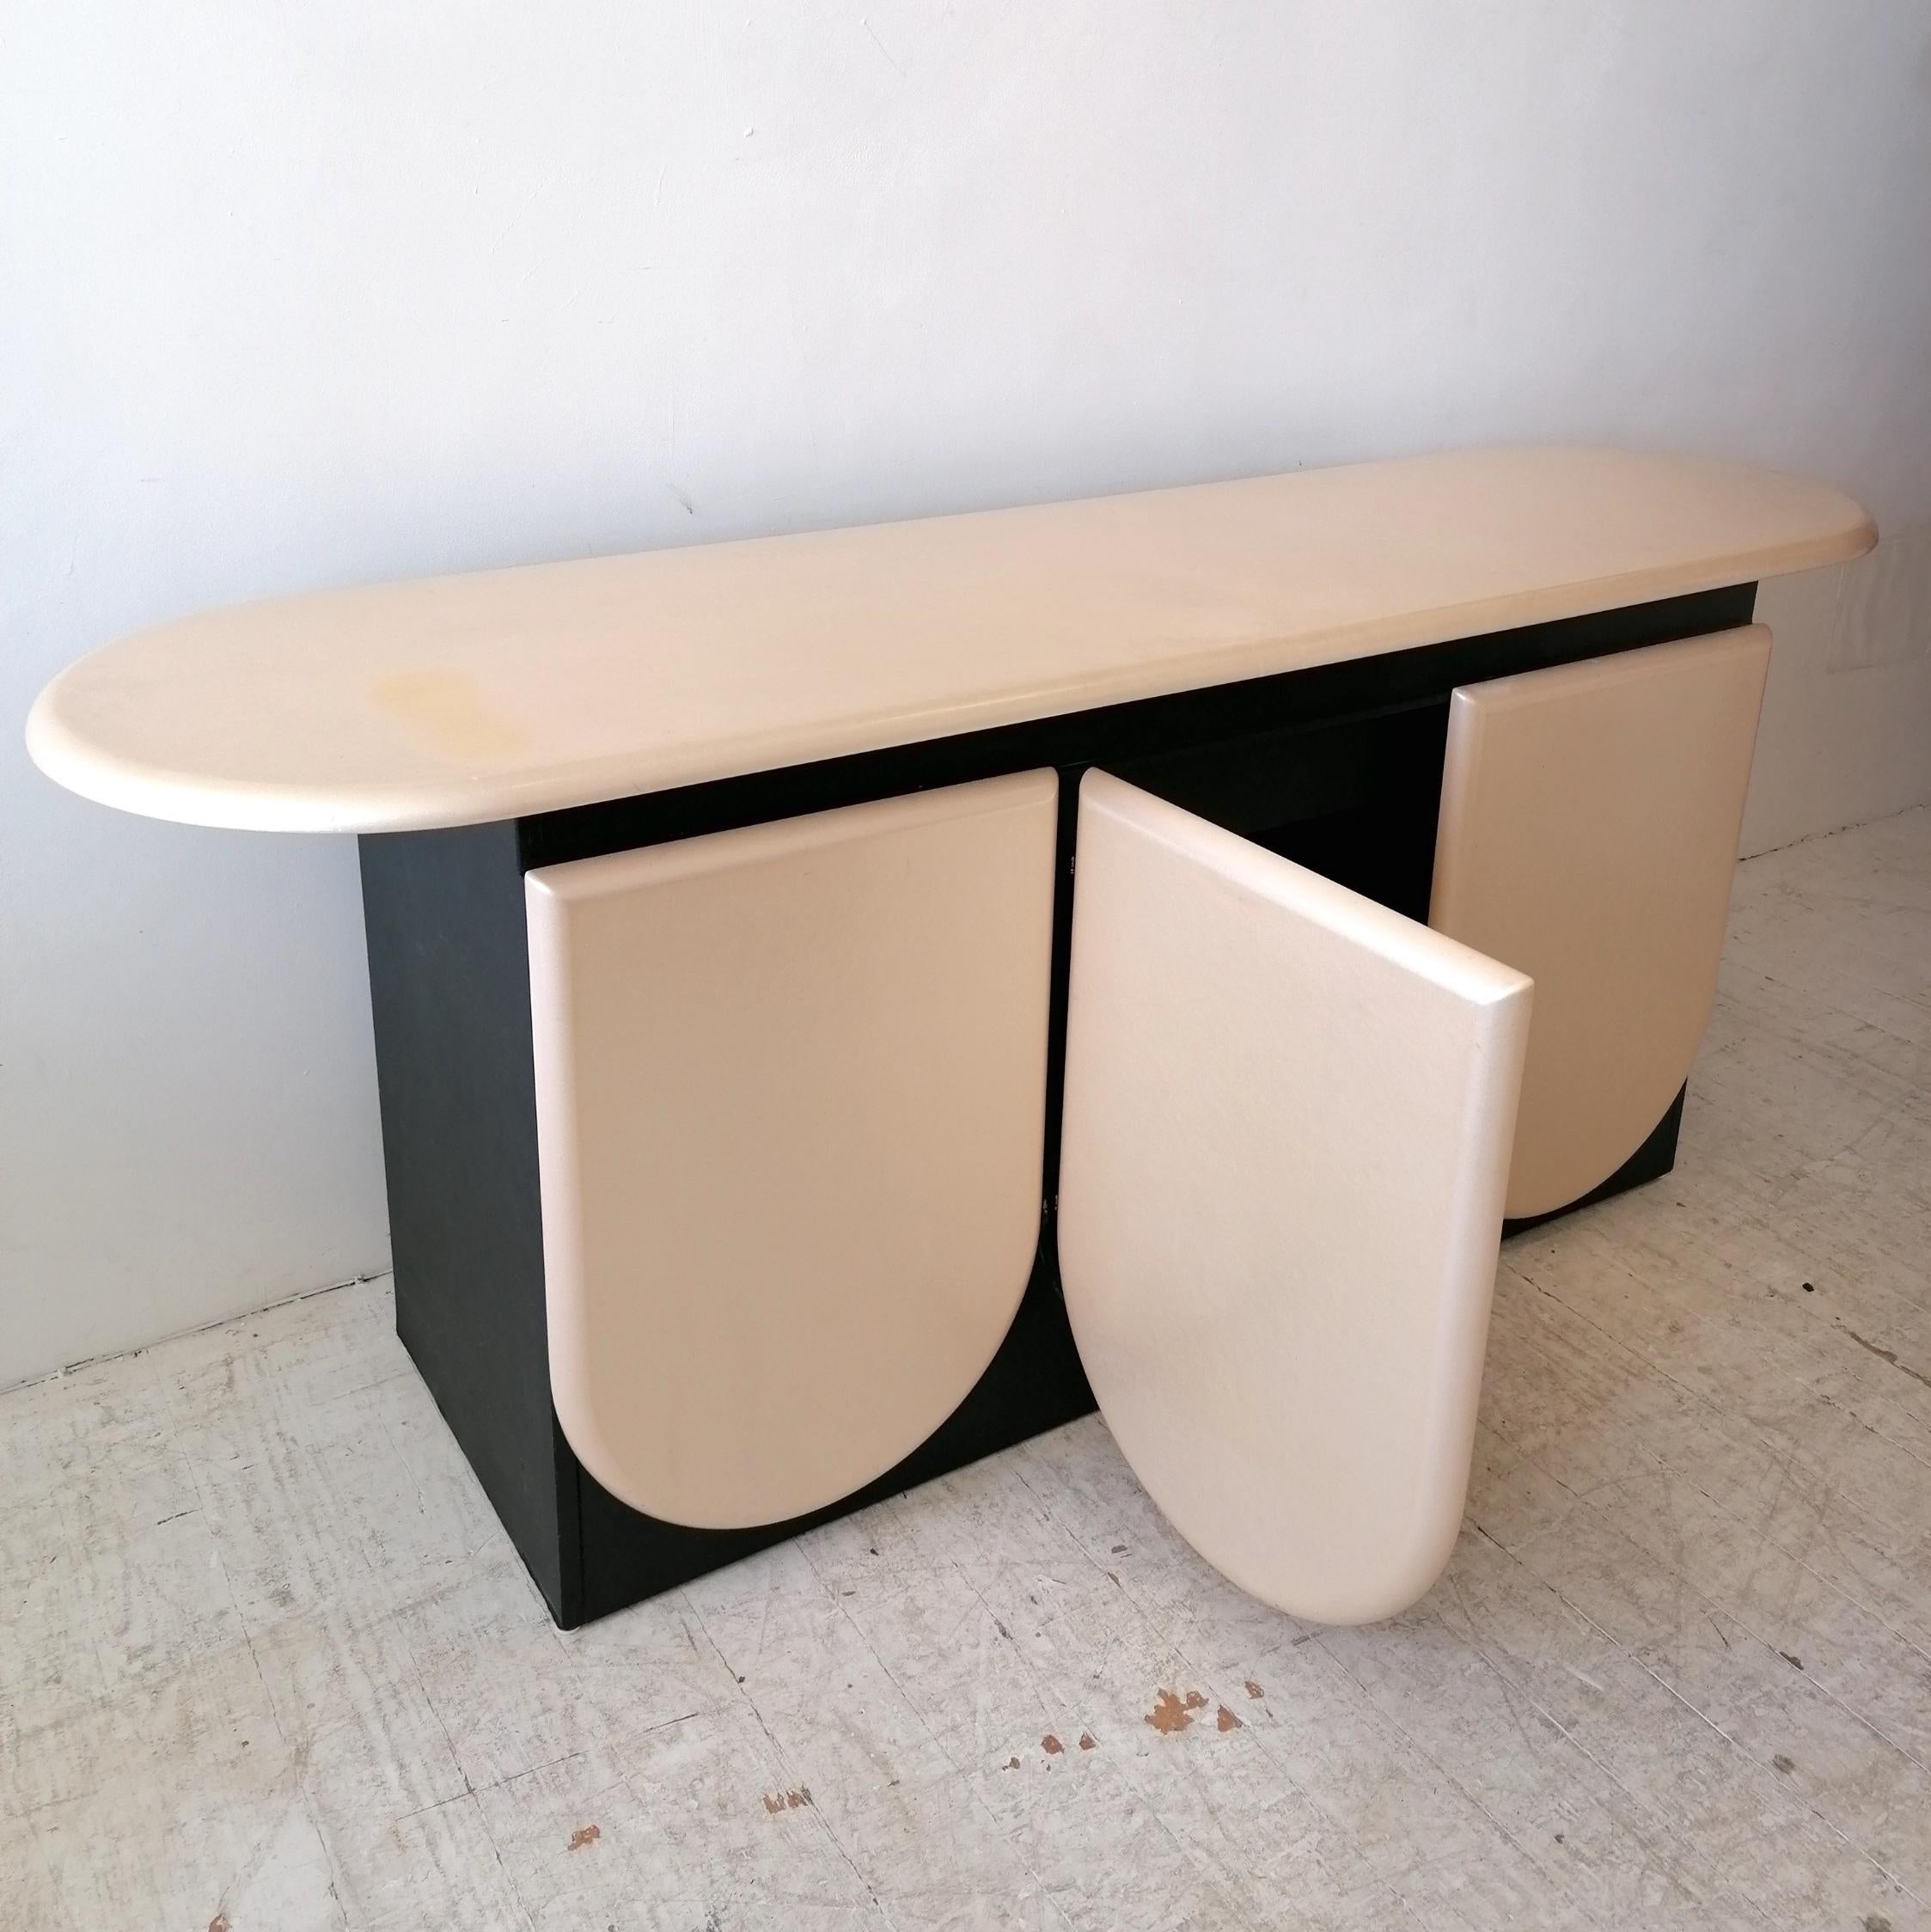 A rare postmodern pearl & black sideboard with petal-shaped doors, by Roger Rougier, Canada 1980s .
I can't find another anywhere online. The top and doors are a pearl lacquer...difficult to show the pearlescent sheen in photos. The body of the